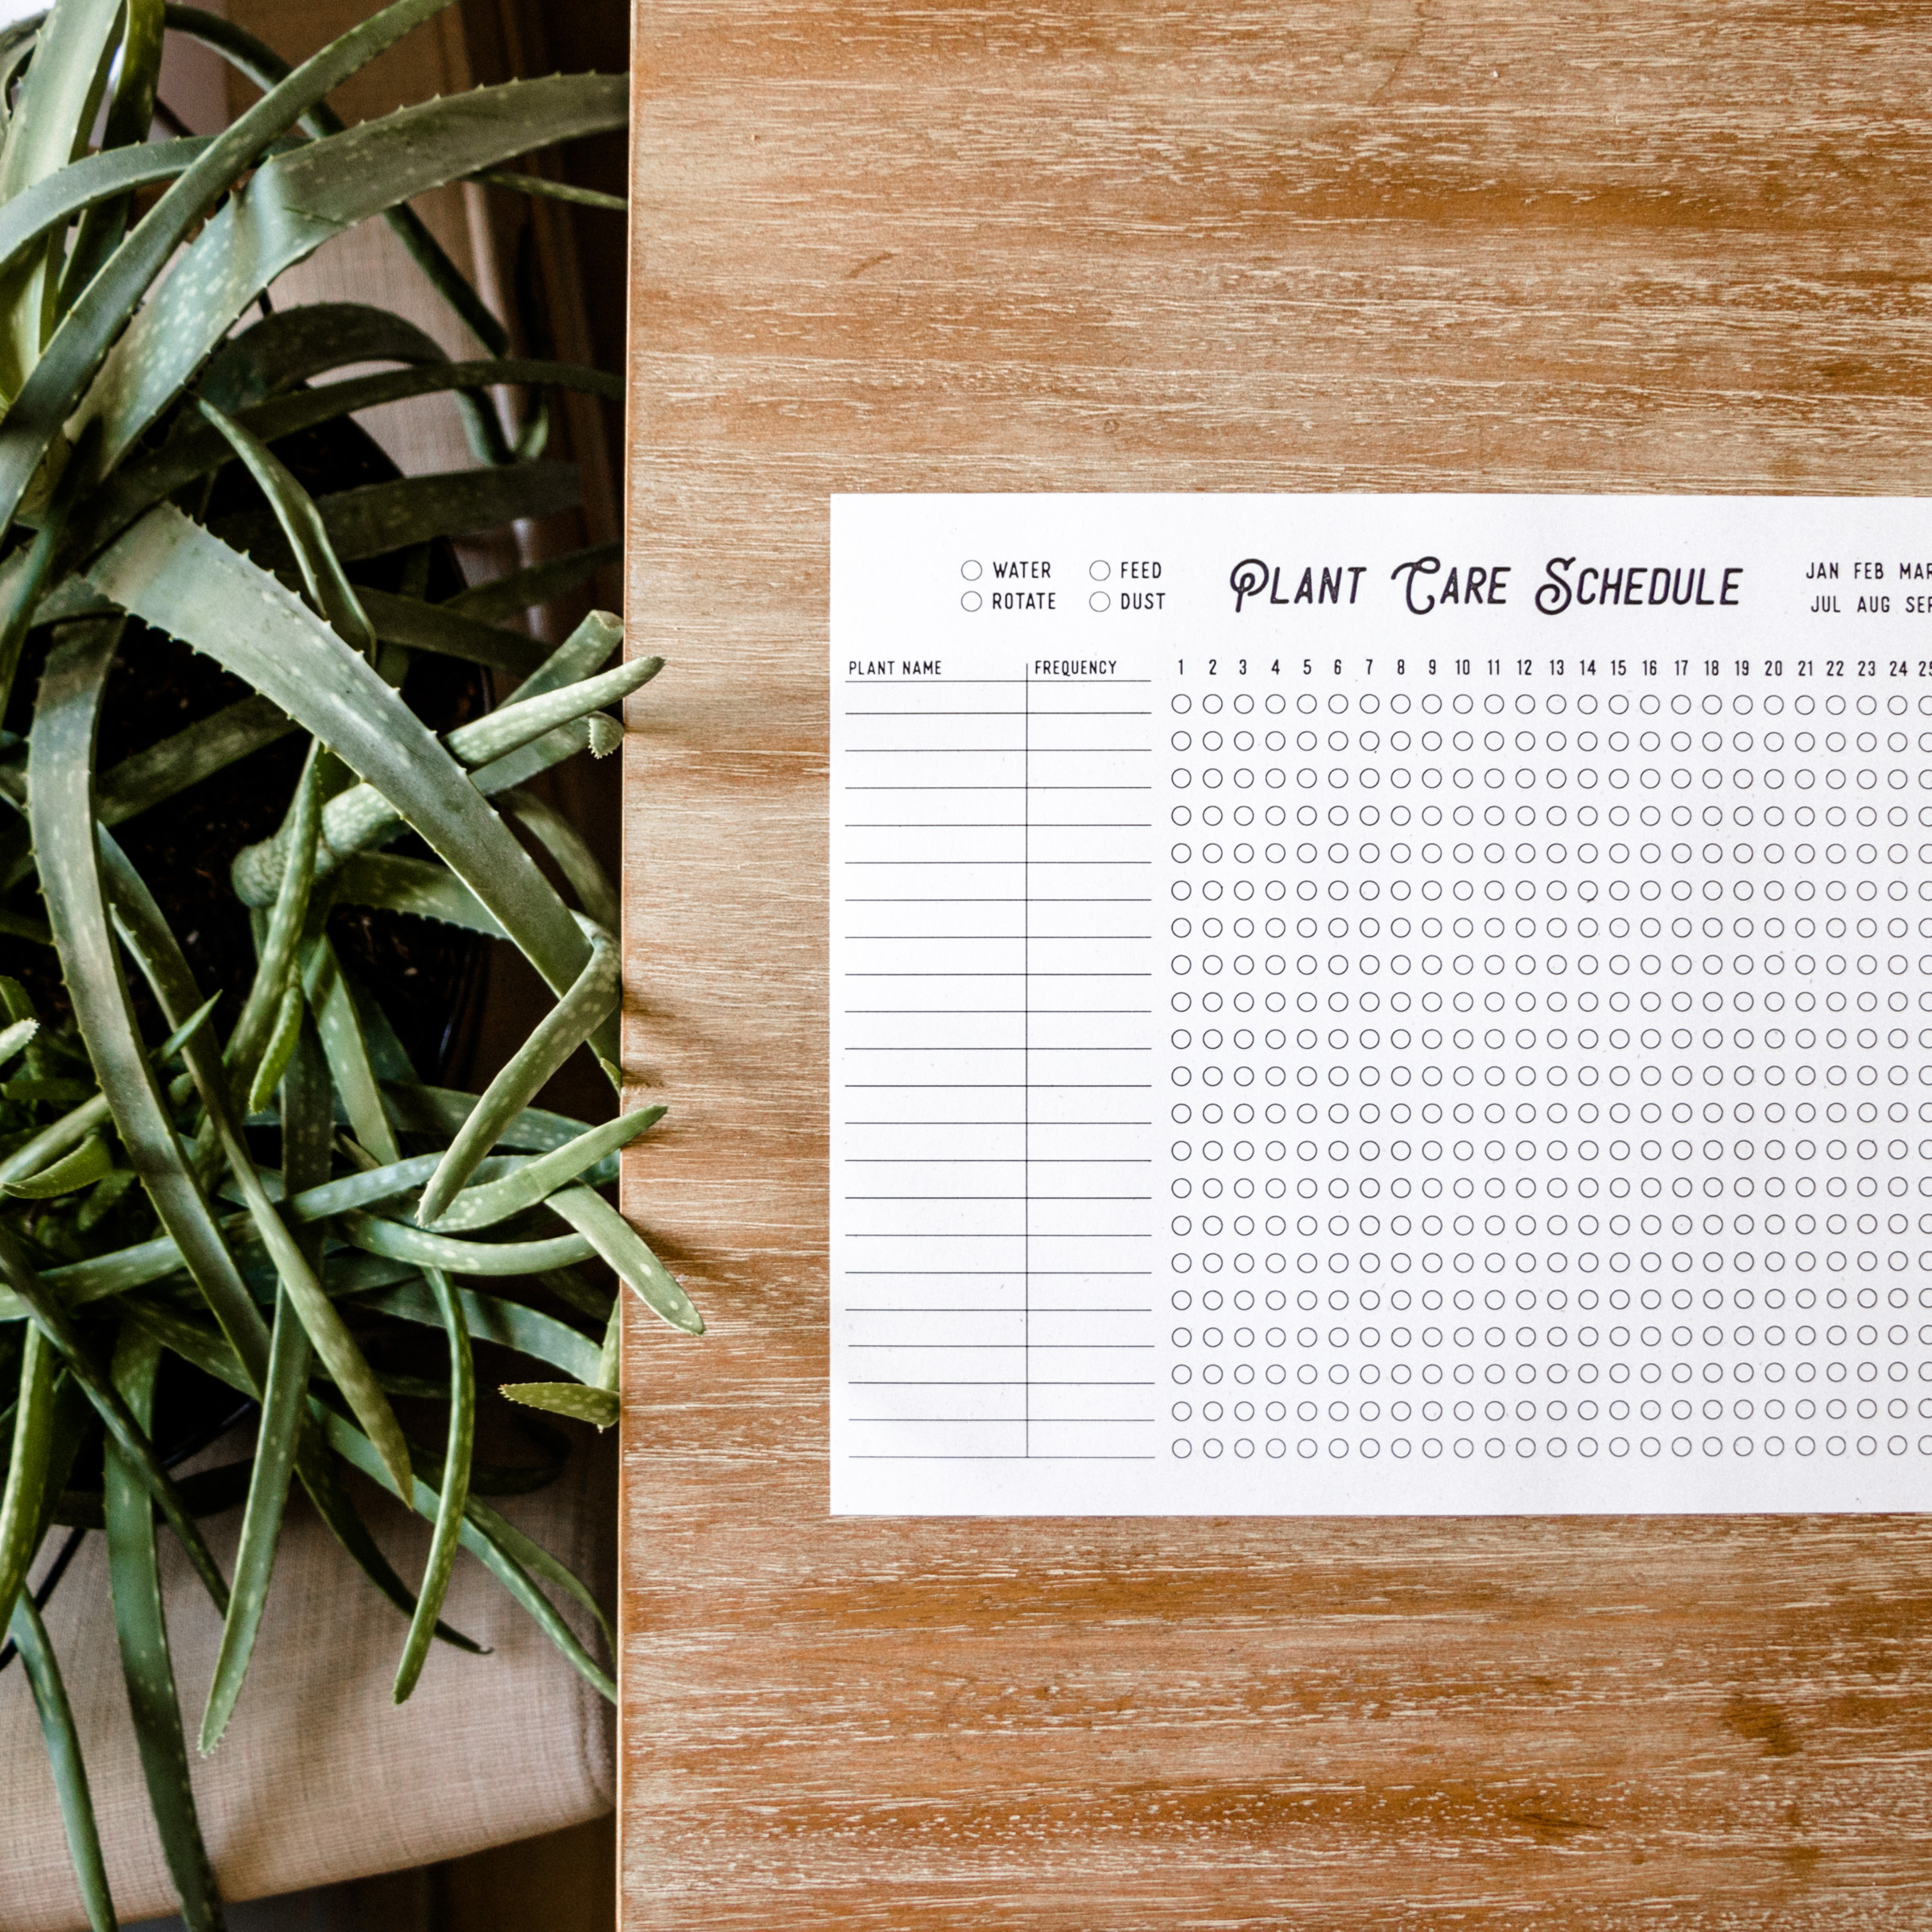 Remembering how often to water your house plants can be a struggle. This printable plant watering schedule will help you track how often to water, feed, dust, and rotate your house plants at a glance.